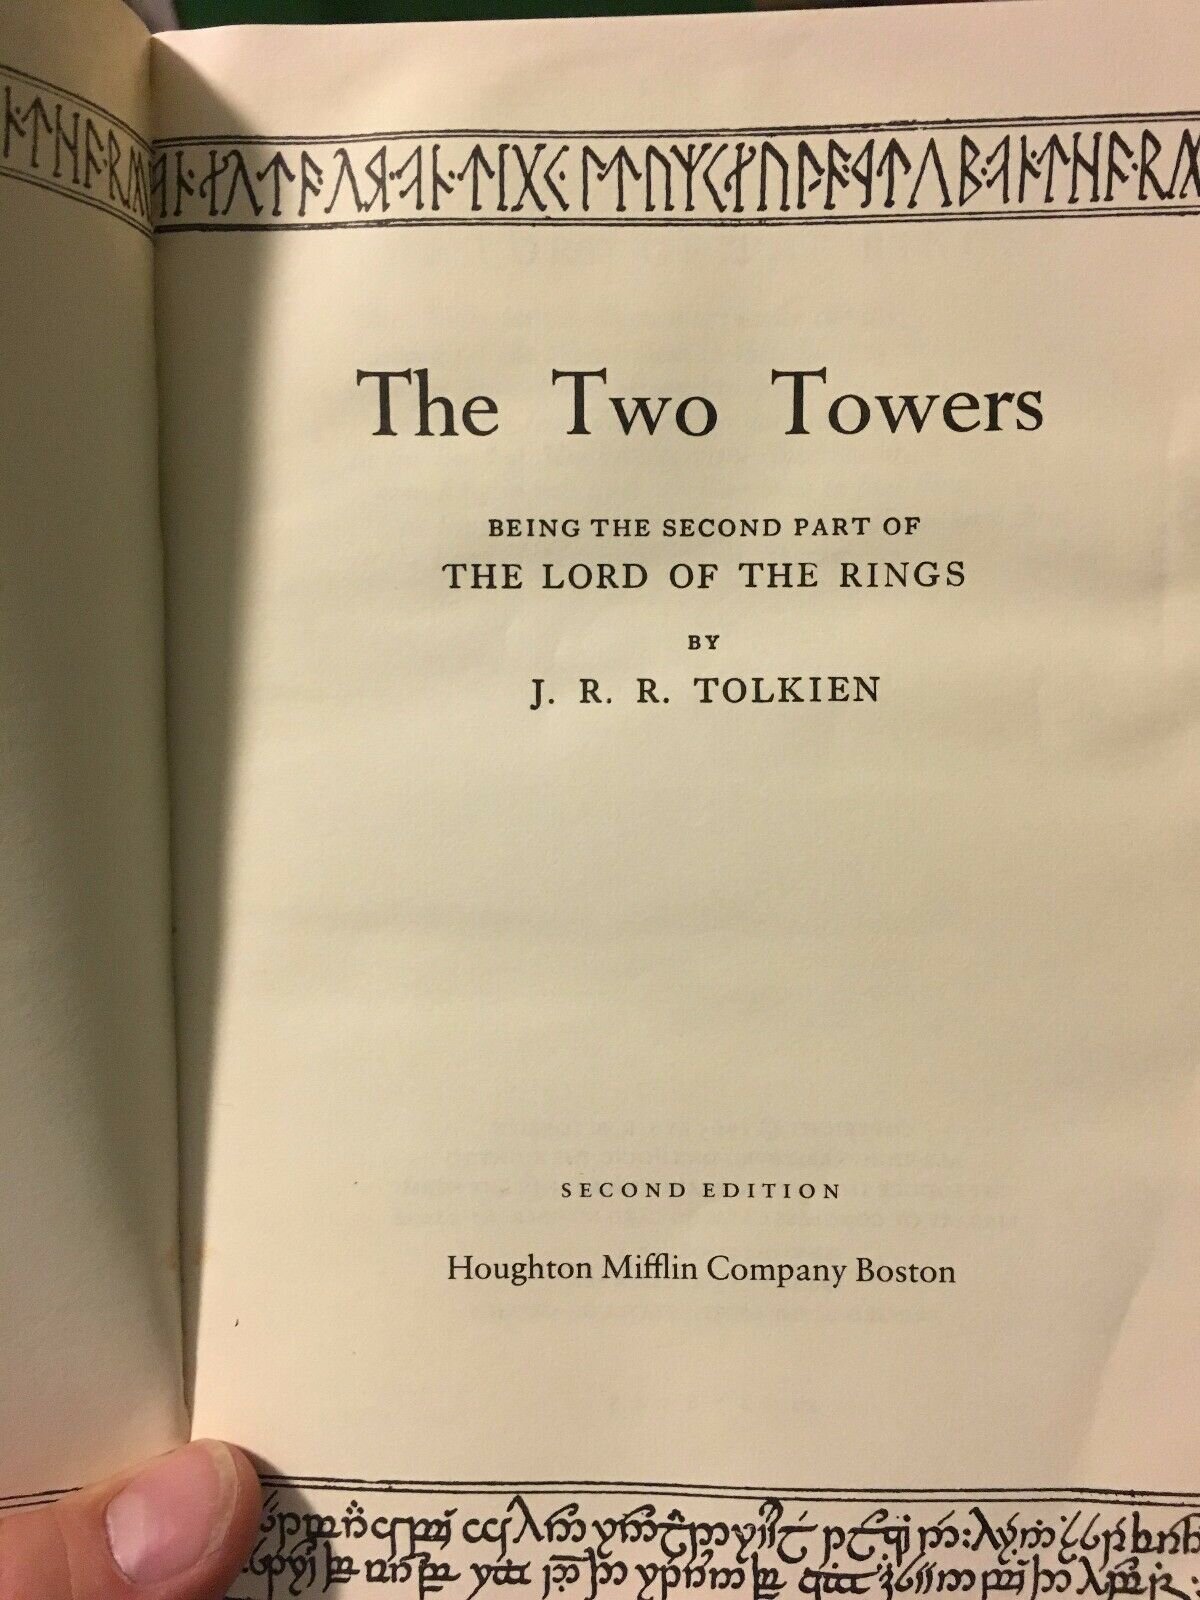 The Two Towers: Being the Second Part of The Lord of the Rings (Paperback)